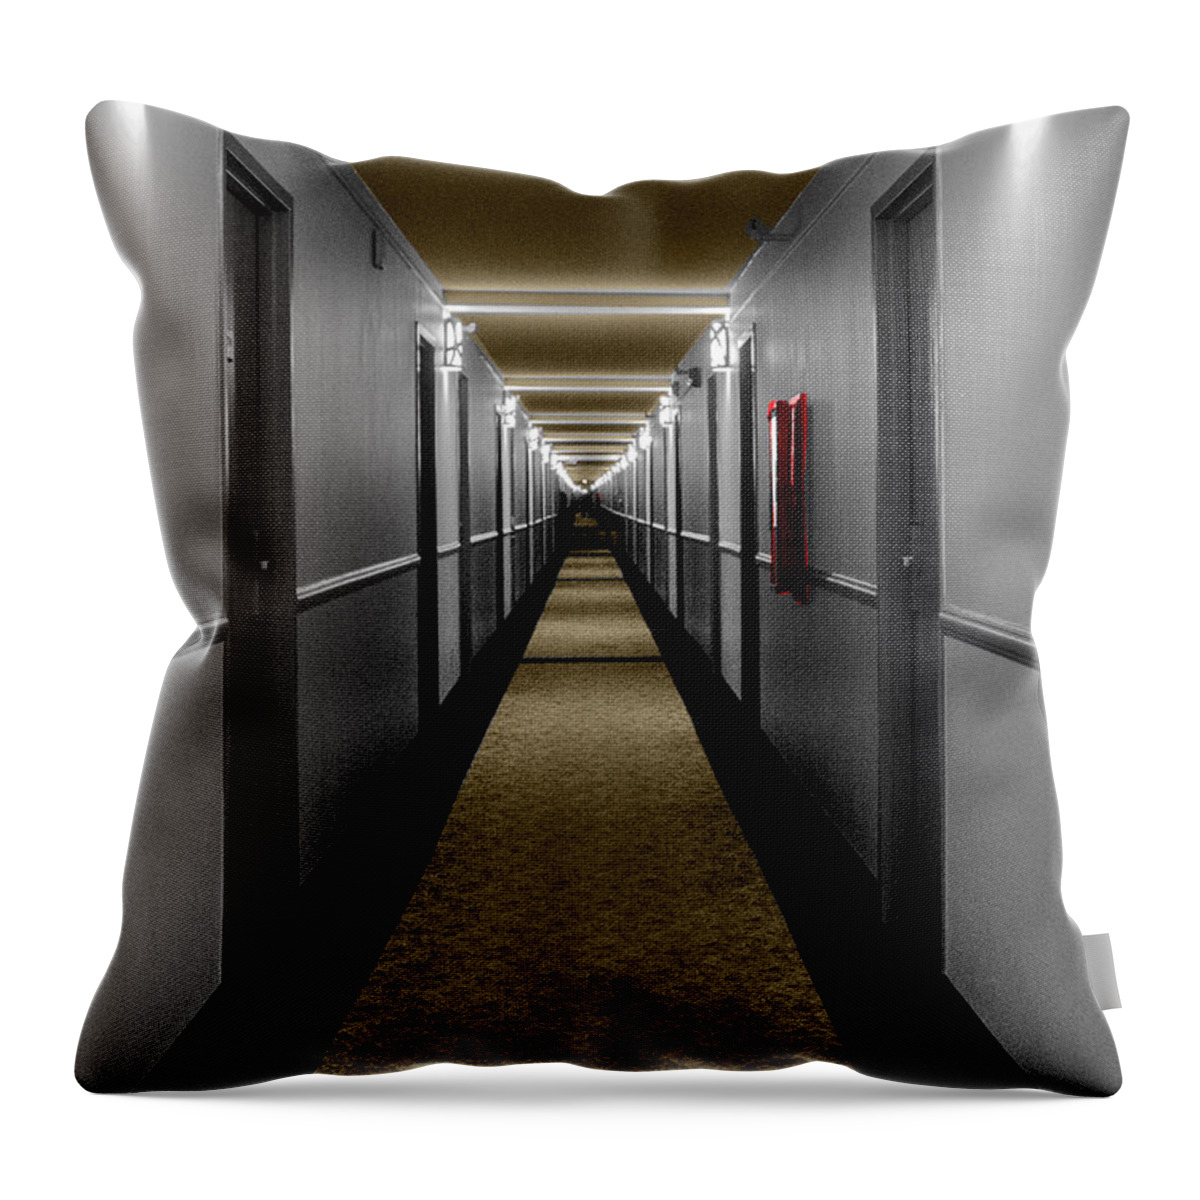 Hotel Throw Pillow featuring the photograph Long Hall of Life by Leon deVose